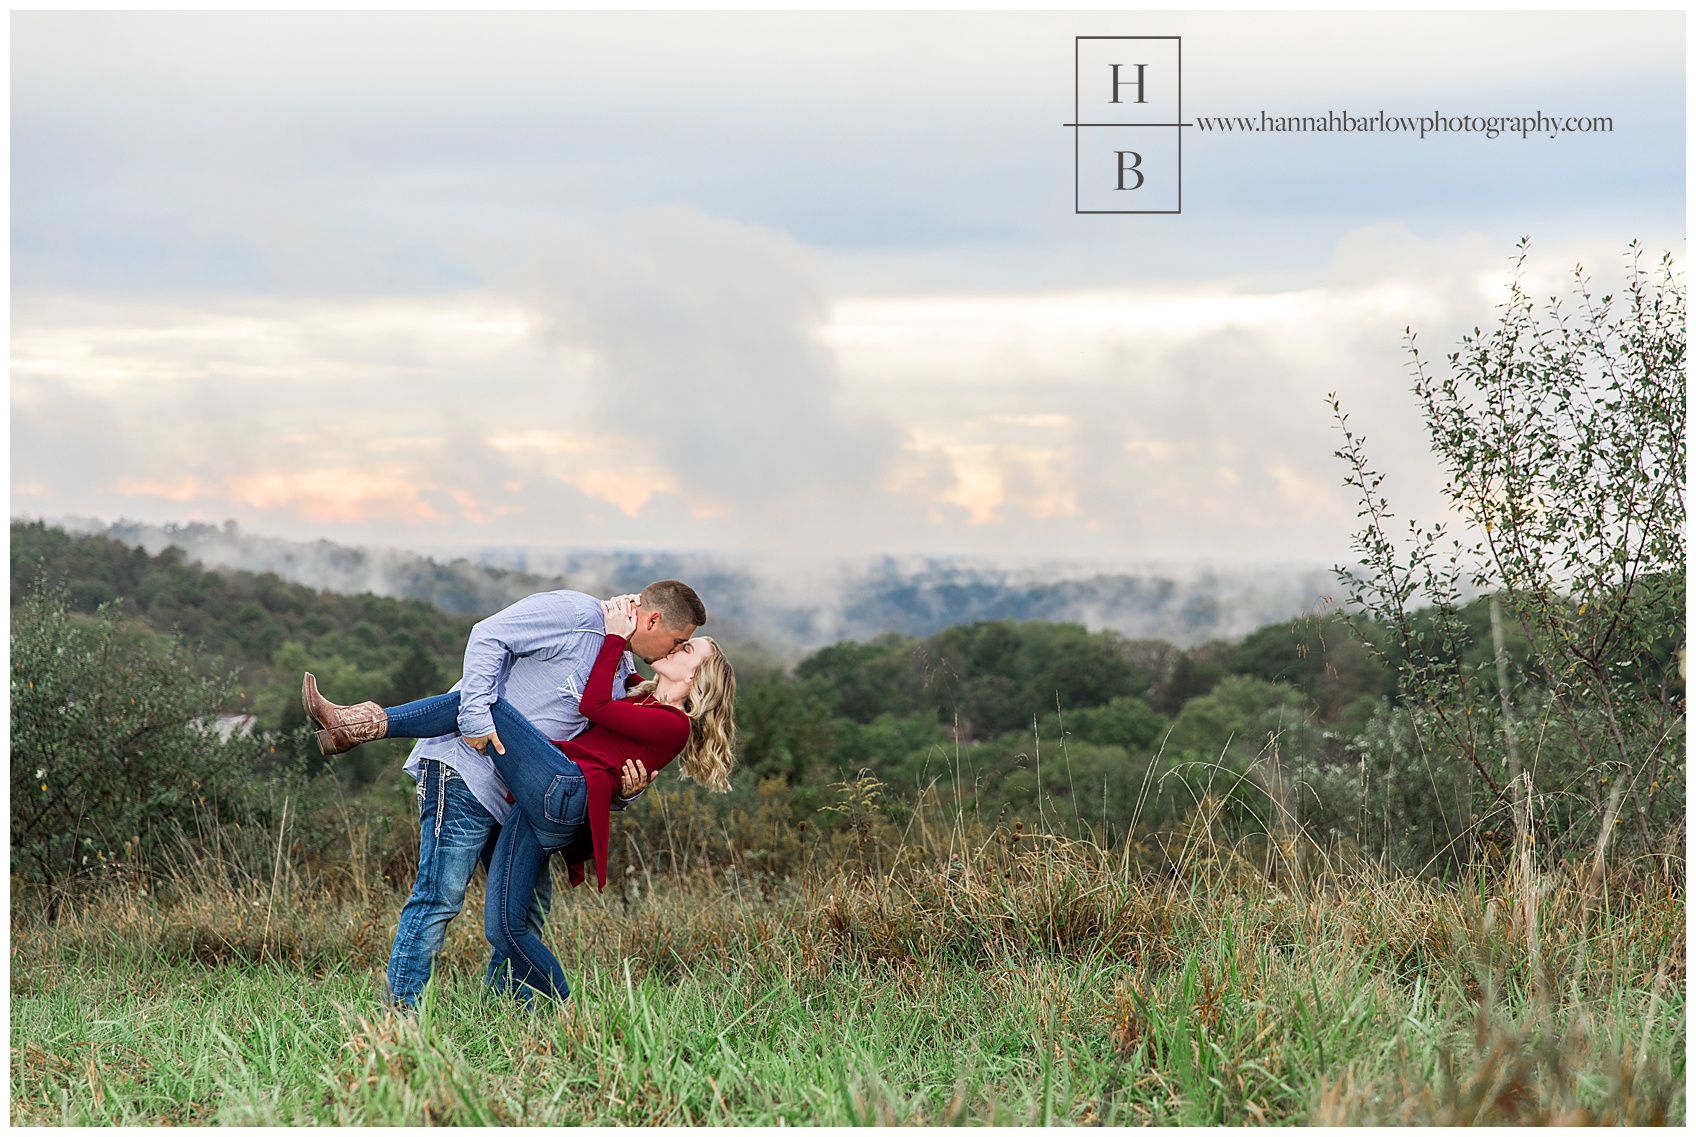 Couple Dipping in Field for Engagement Photos